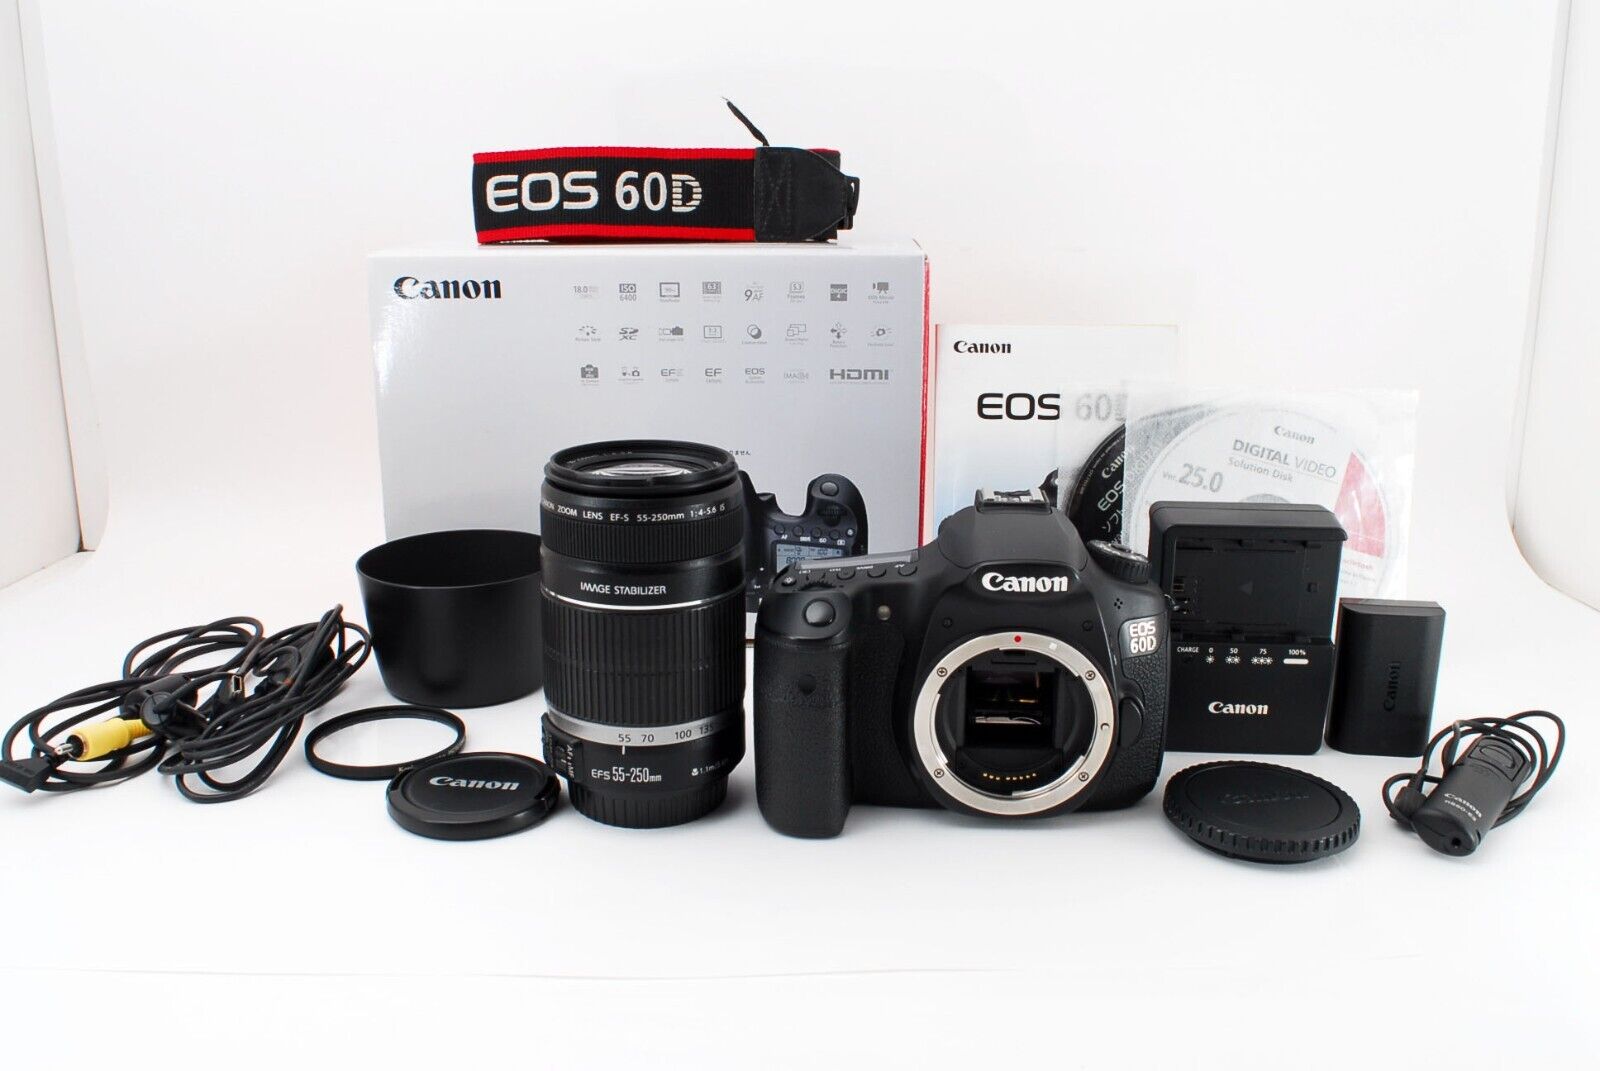 [Very Good] Canon DSLR Camera EOS 60D Zoom Kit w/ EF-S 55-250mm from Japan